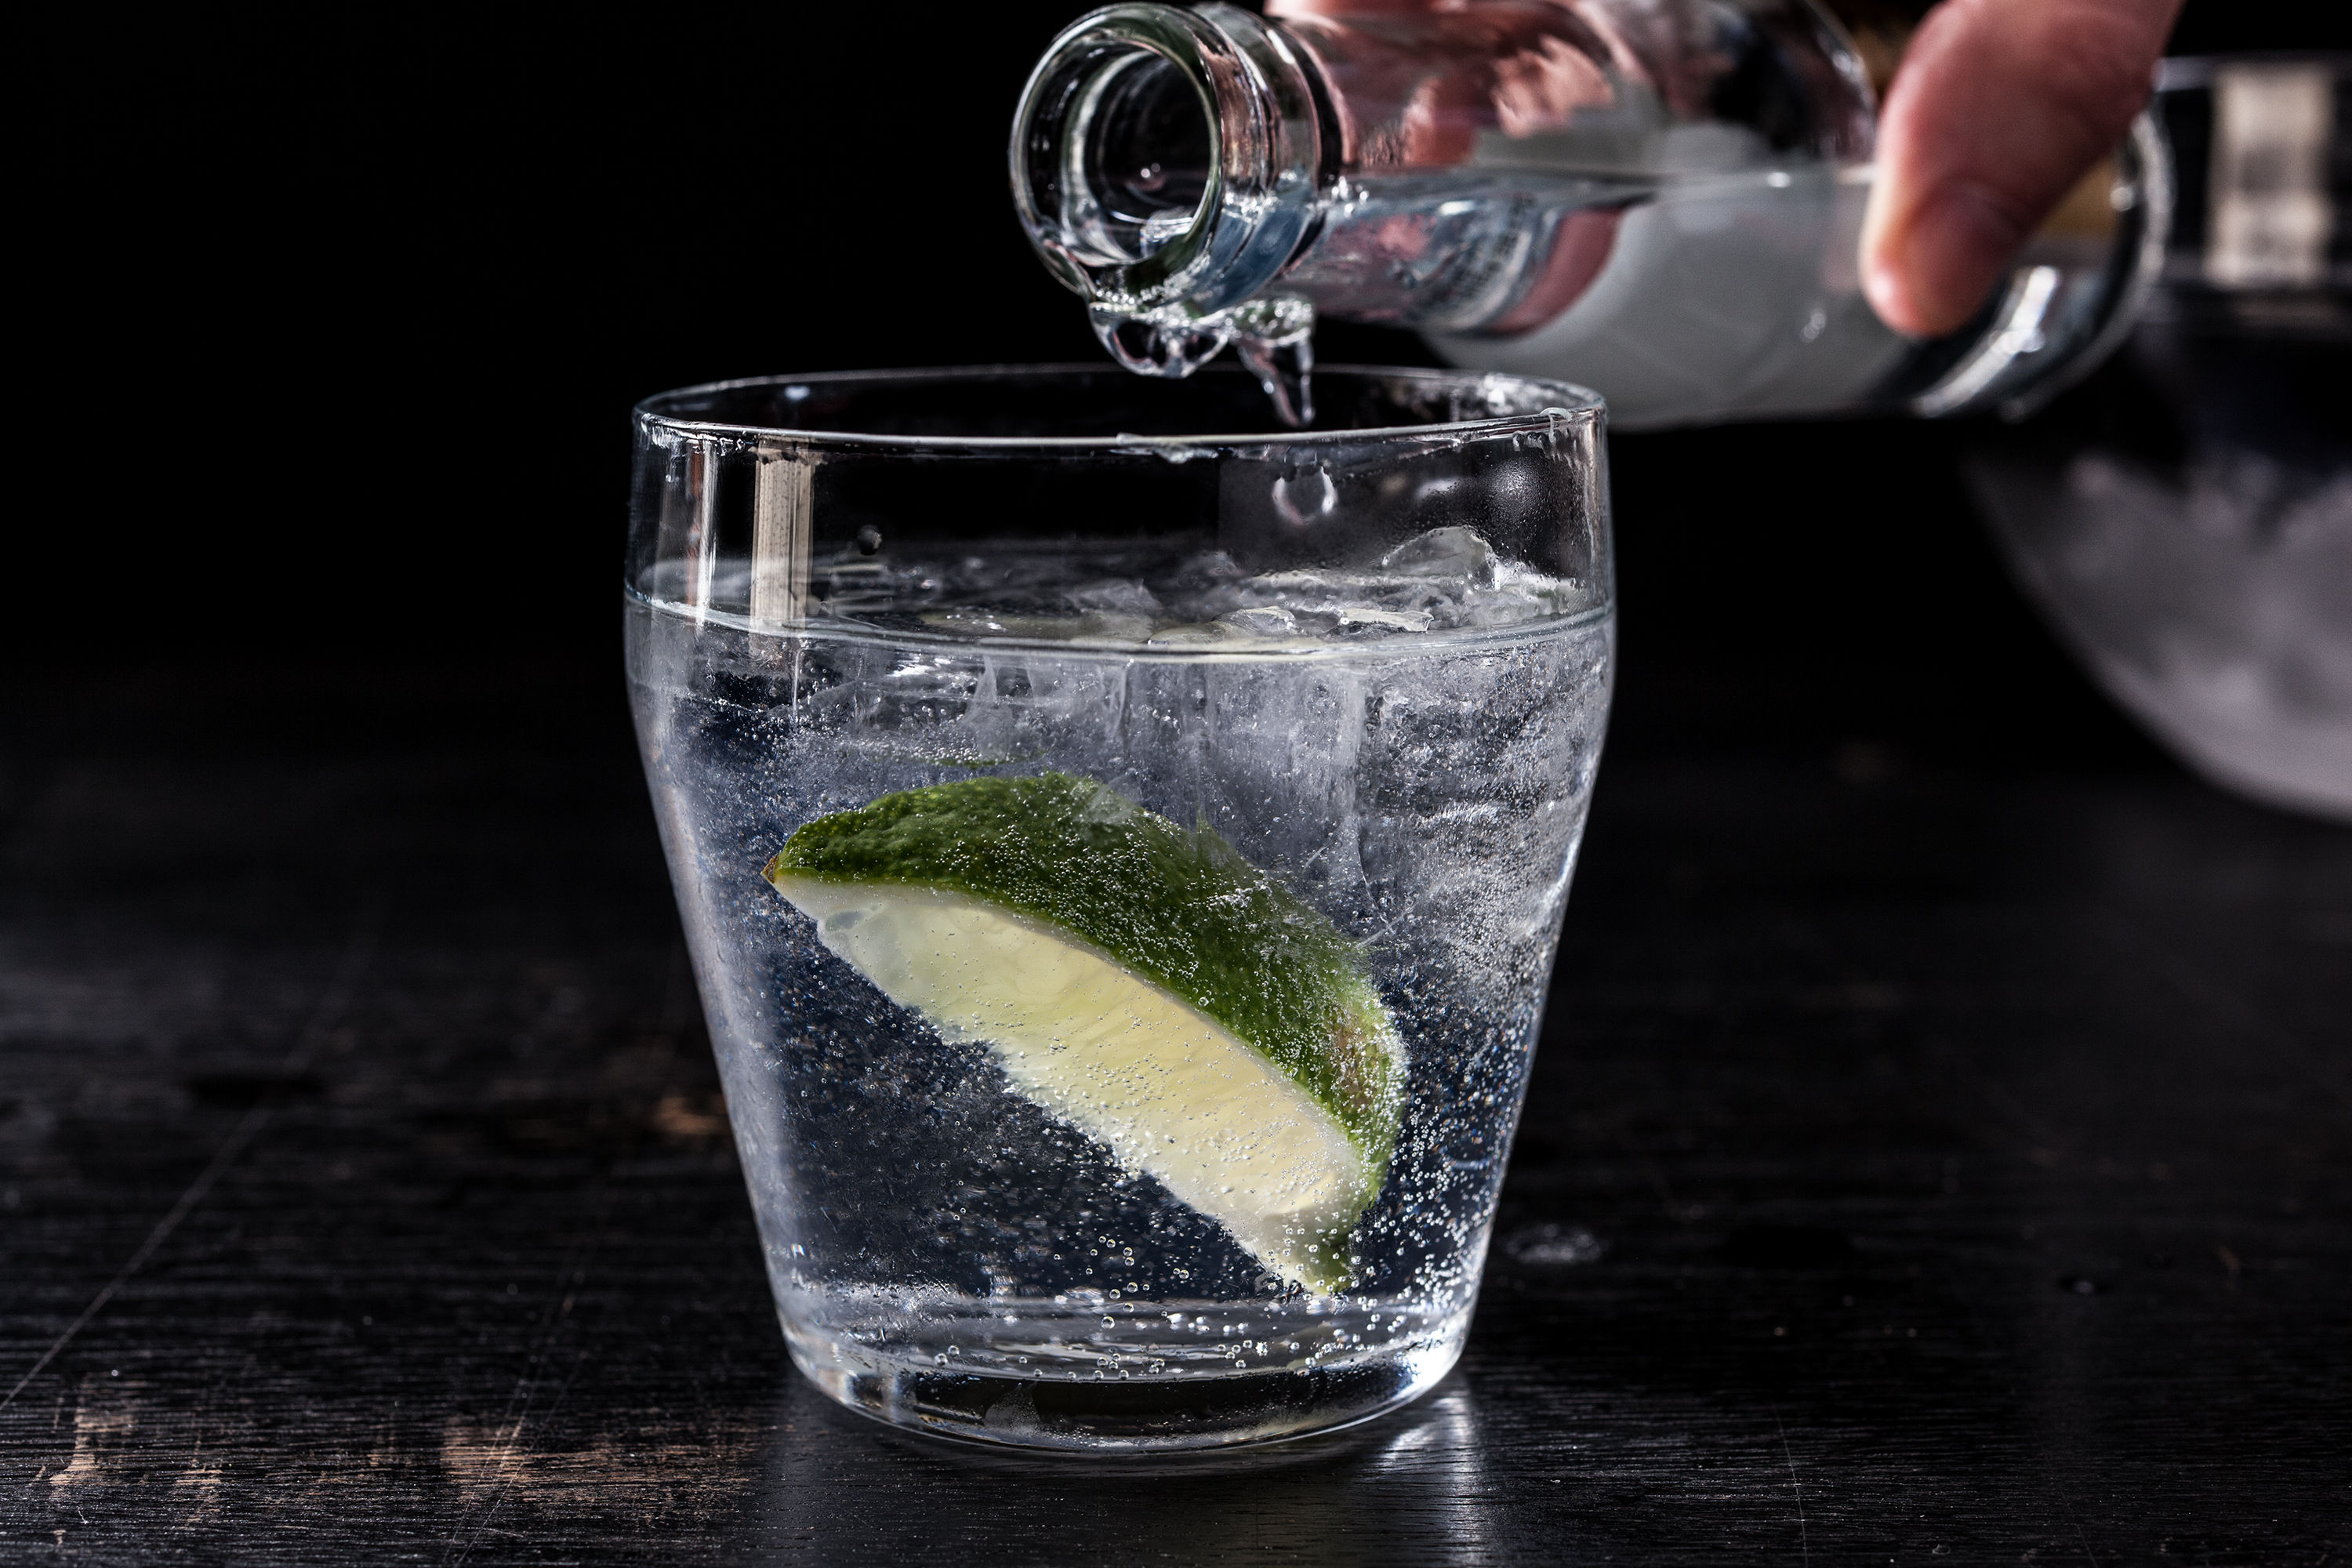 Mix it up: What makes a good gin and tonic?